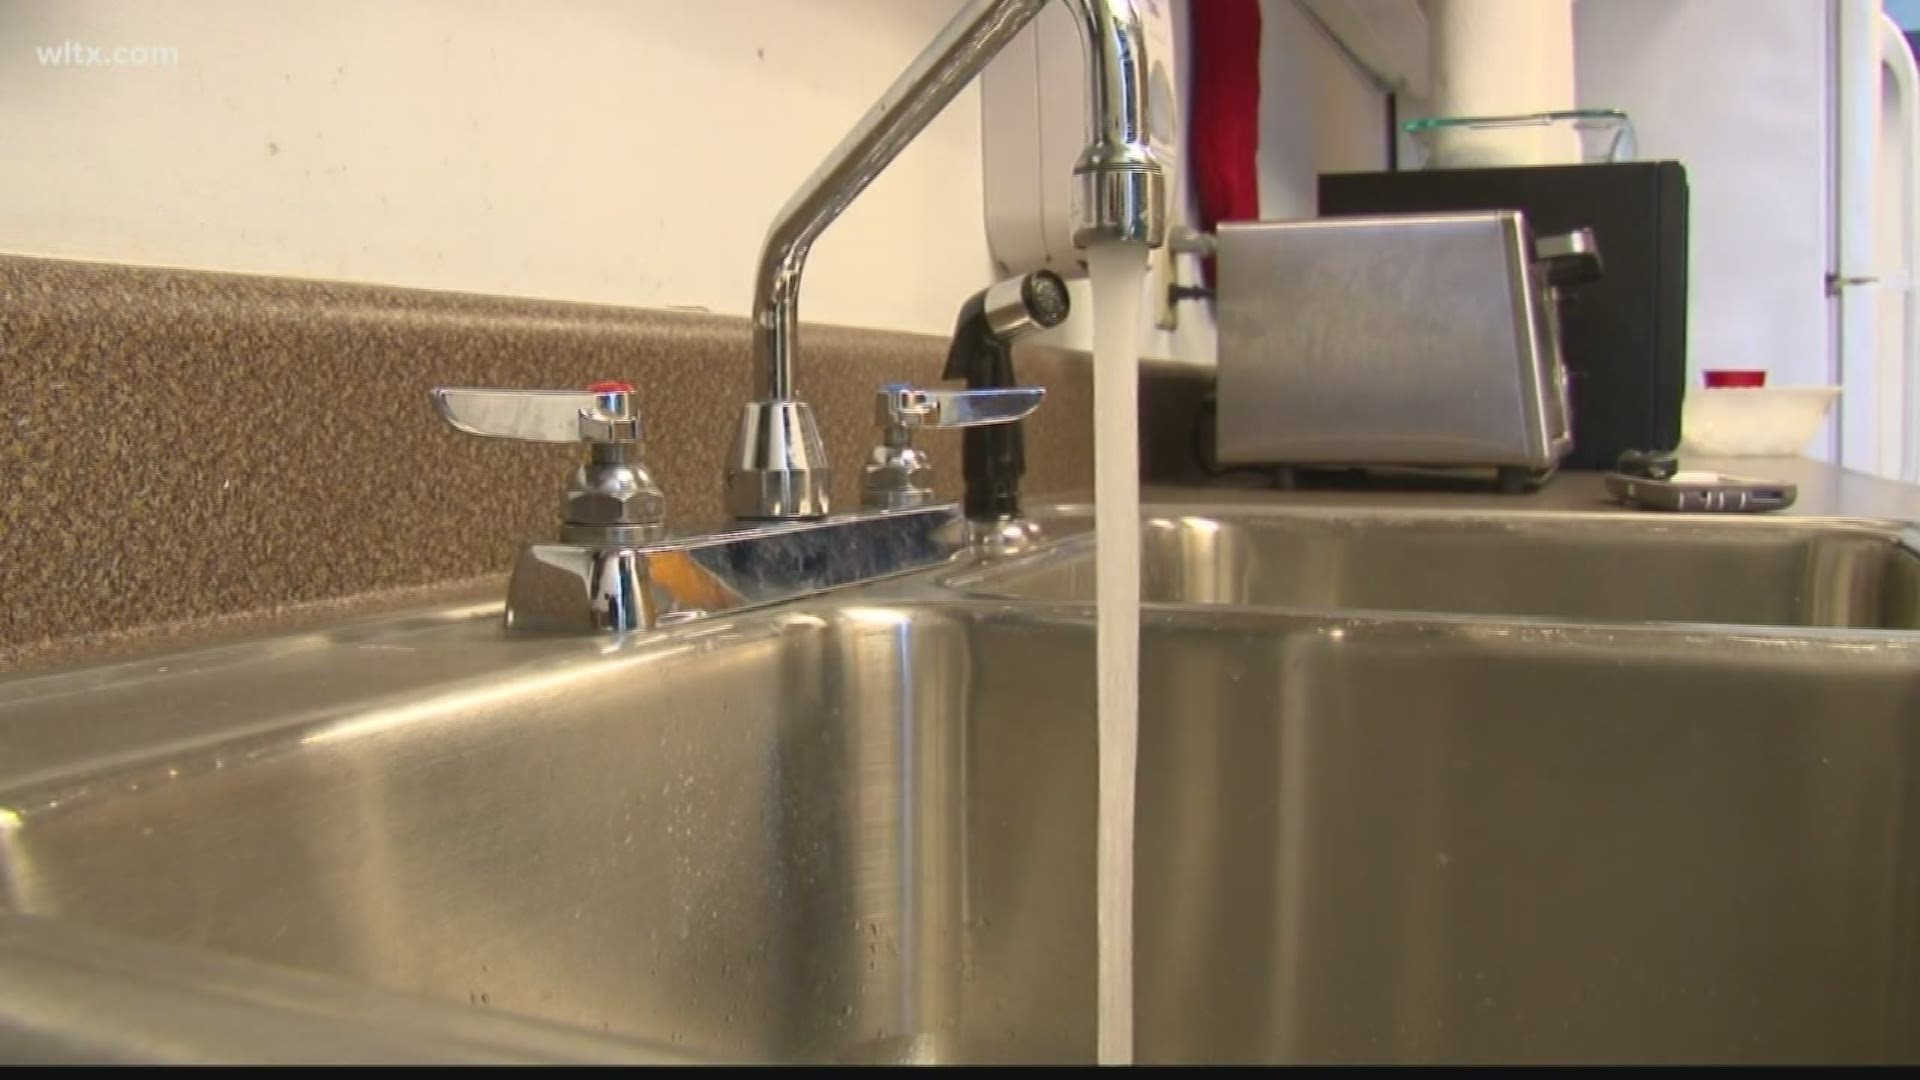 Blue Granite Water Company is looking to raise rates on customers by 50 percent...but the State Consumer Affairs department has filed a petition to intervene with th